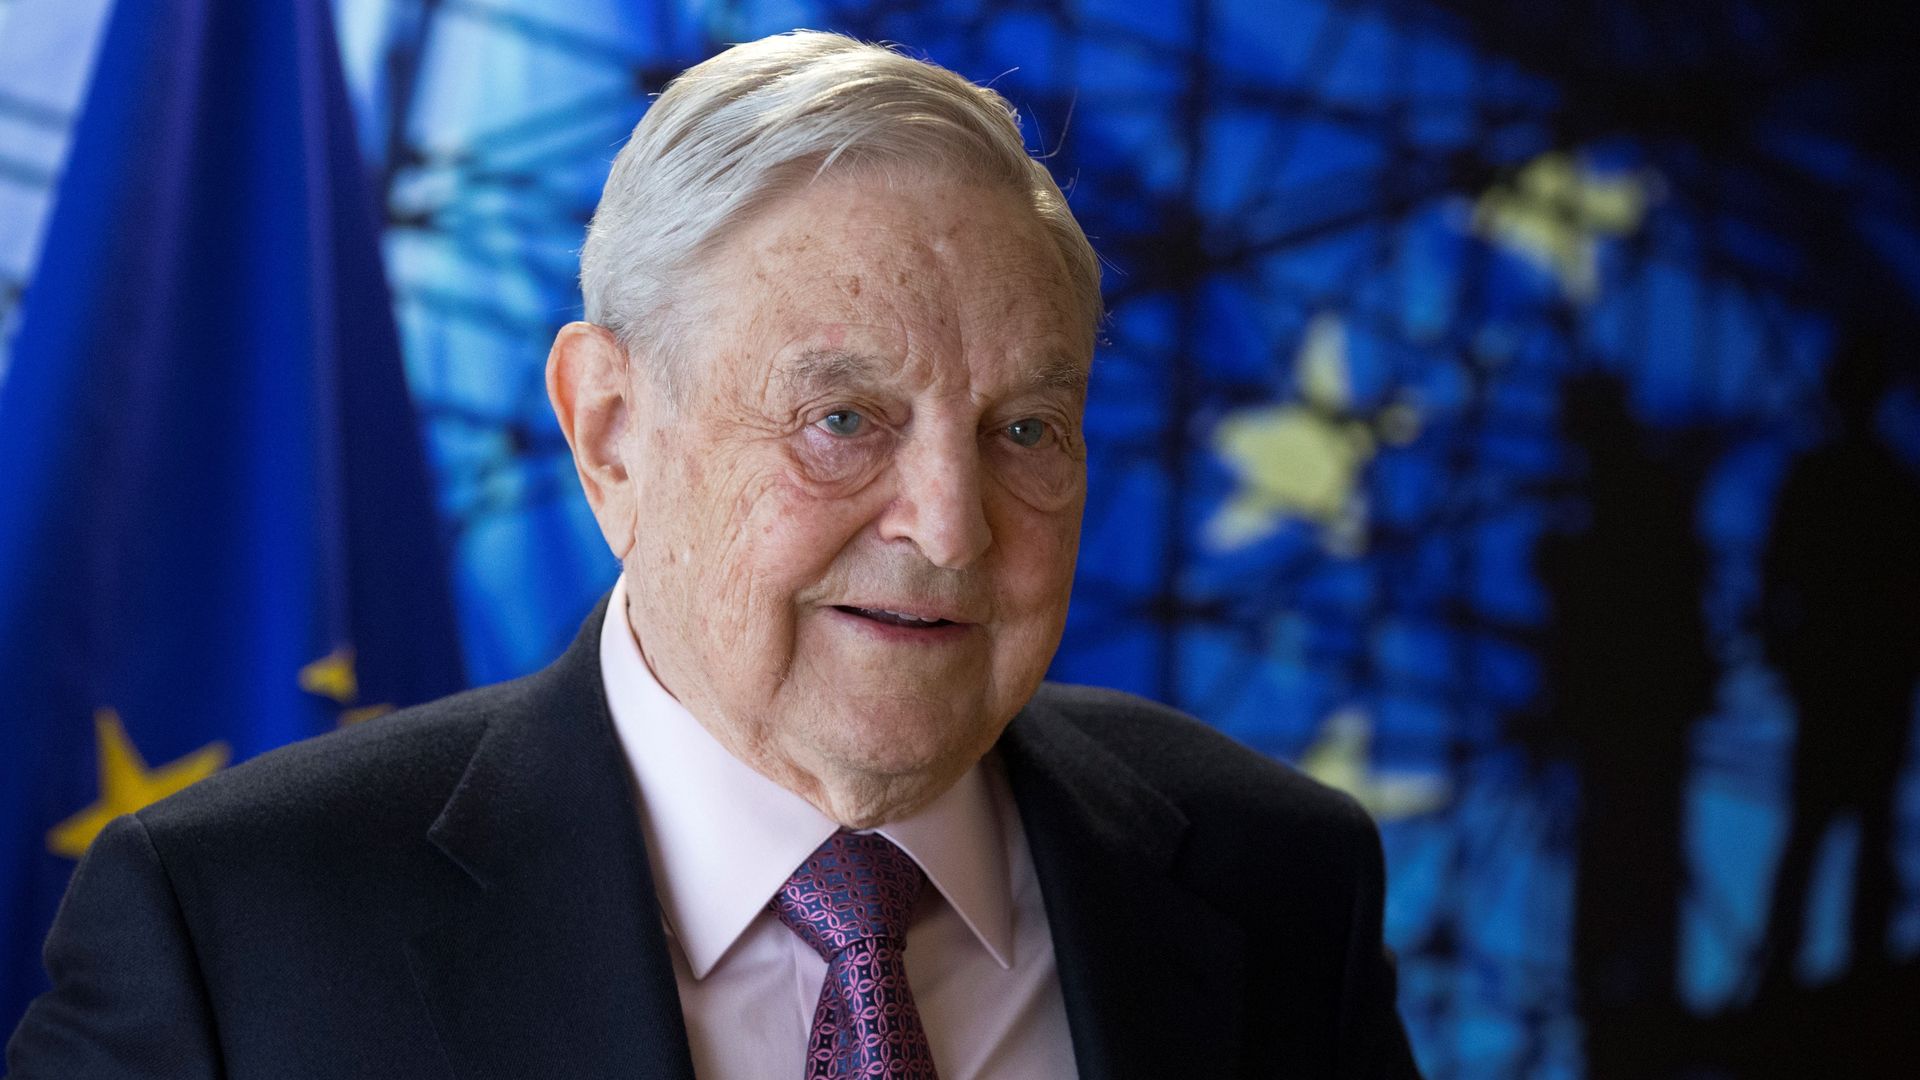 George Soros, Founder and Chairman of the Open Society Foundations arrives for a meeting in Brussels.